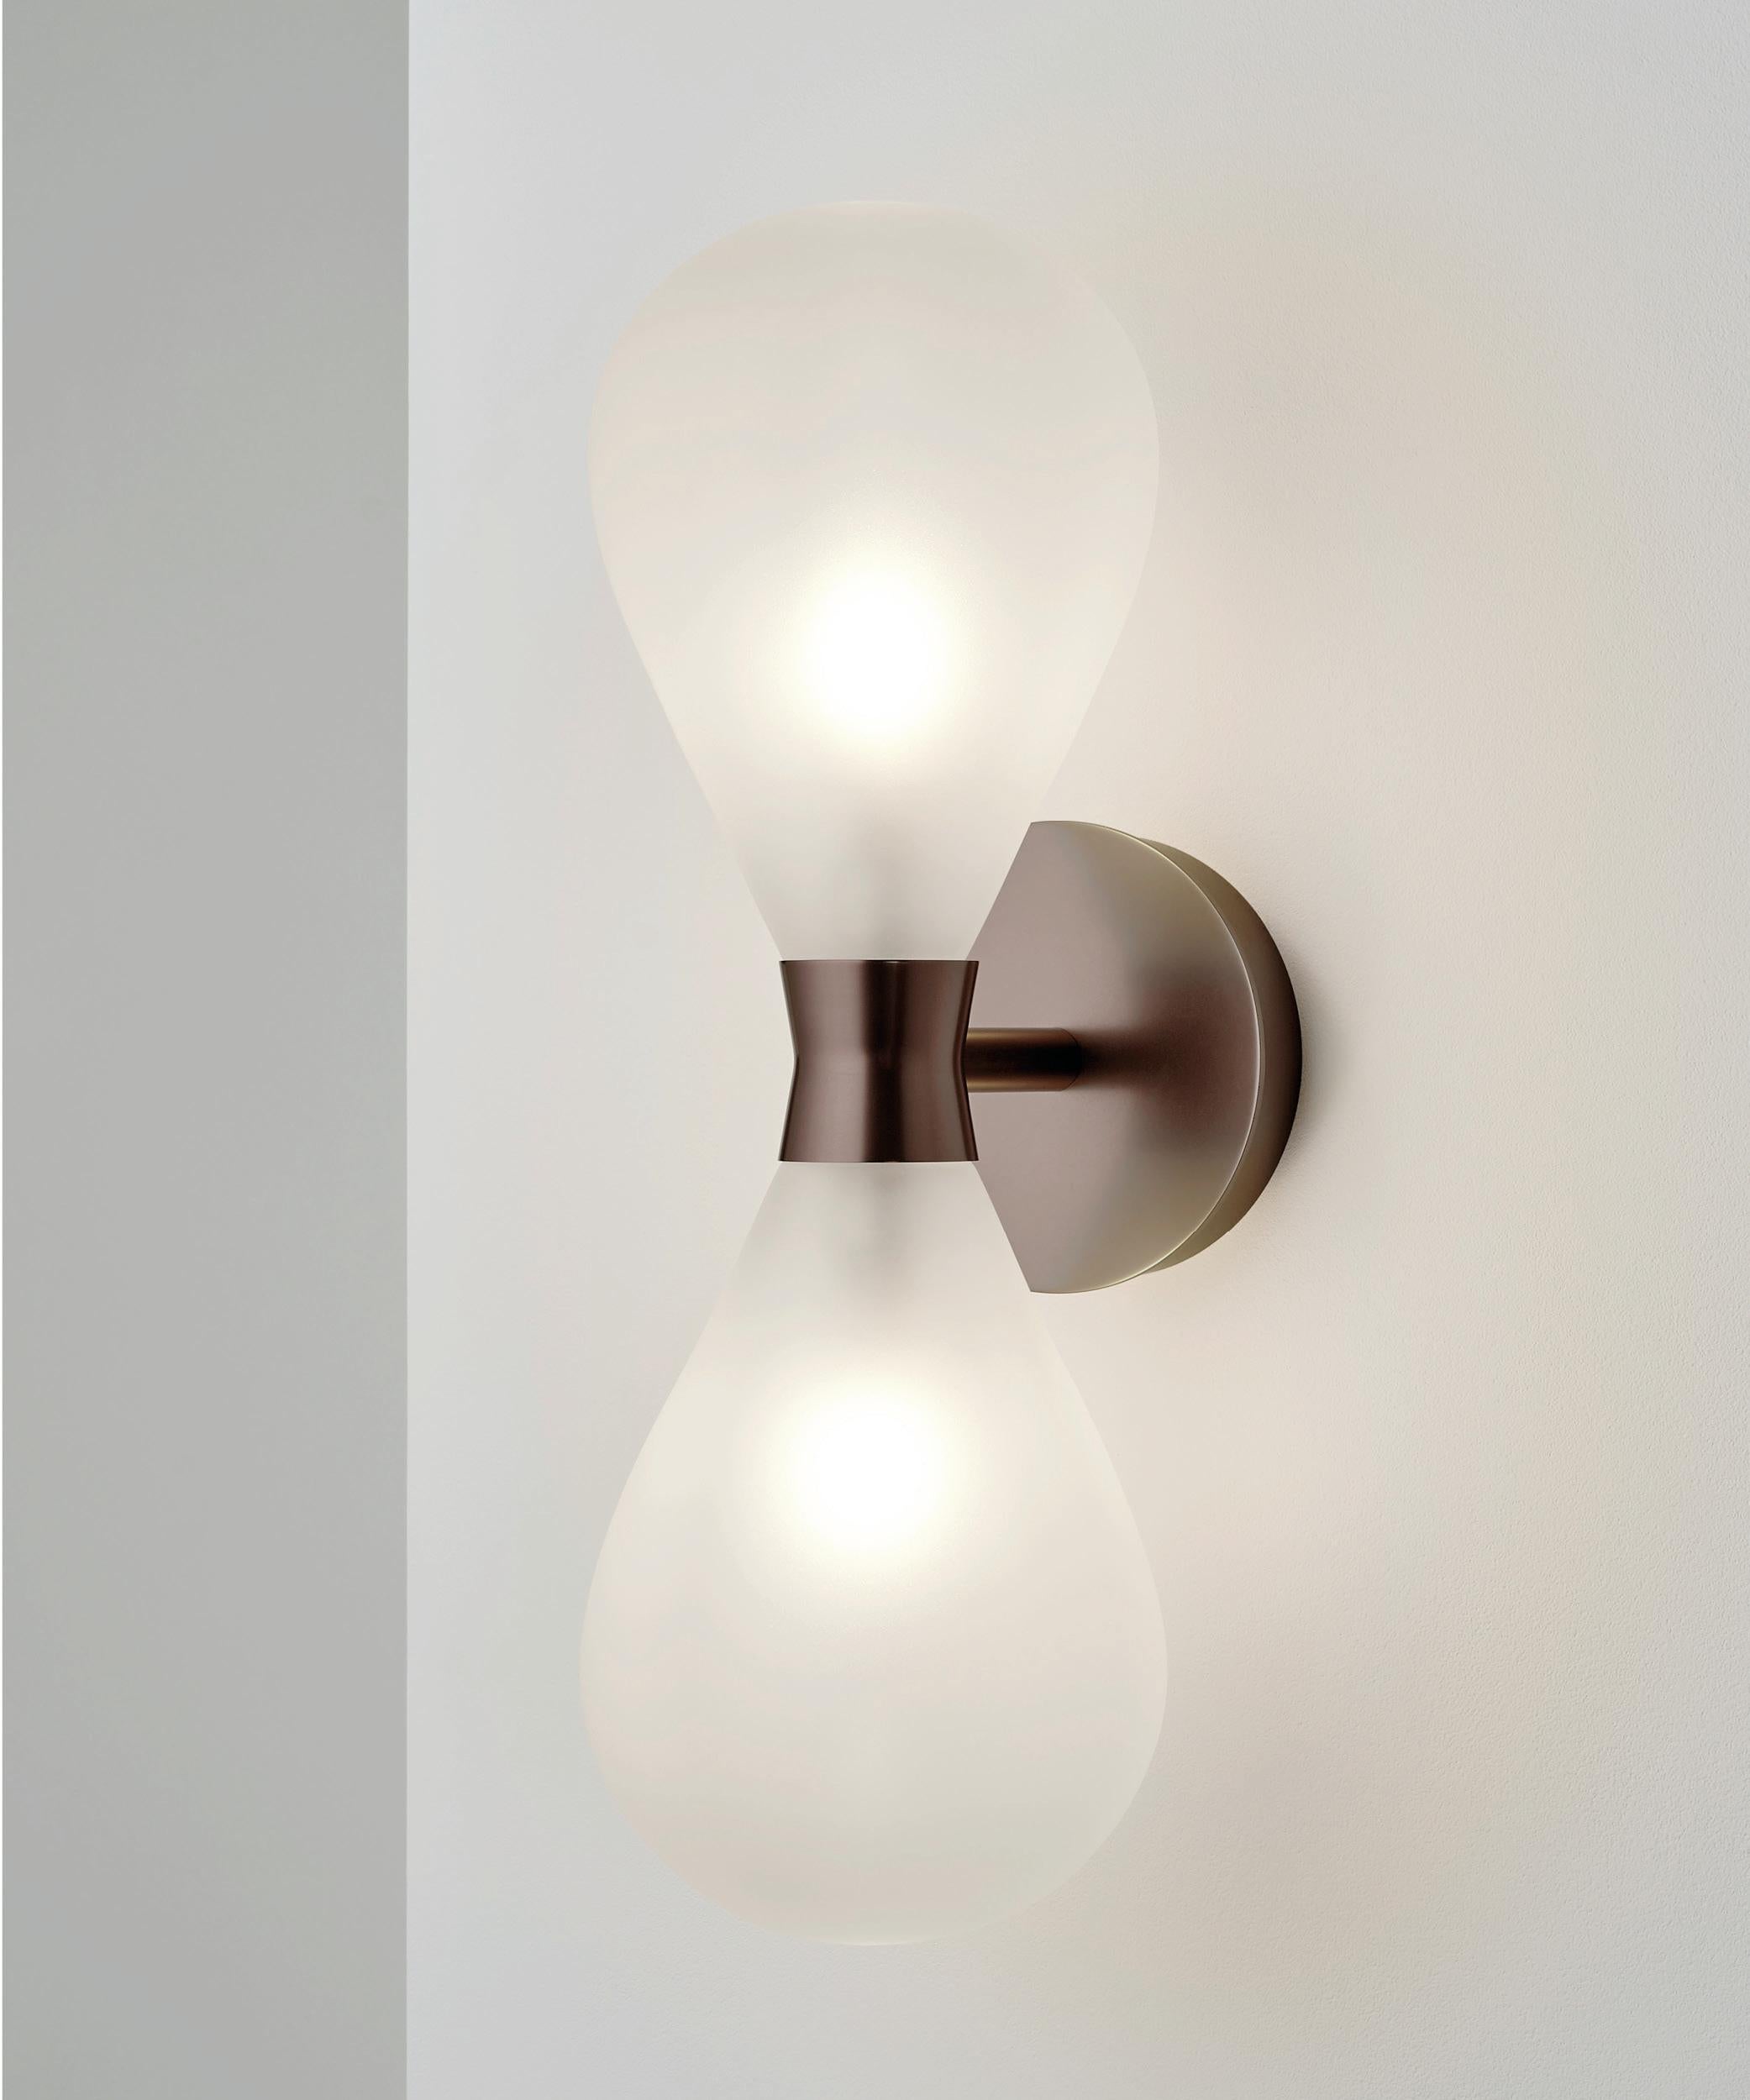 A larger version of the Cintola Wall Light, the Twin adds vertical height and presence to the rounded profile of its sibling. The light is available in a range of standard and custom finishes, alongside a selection of complementary glass